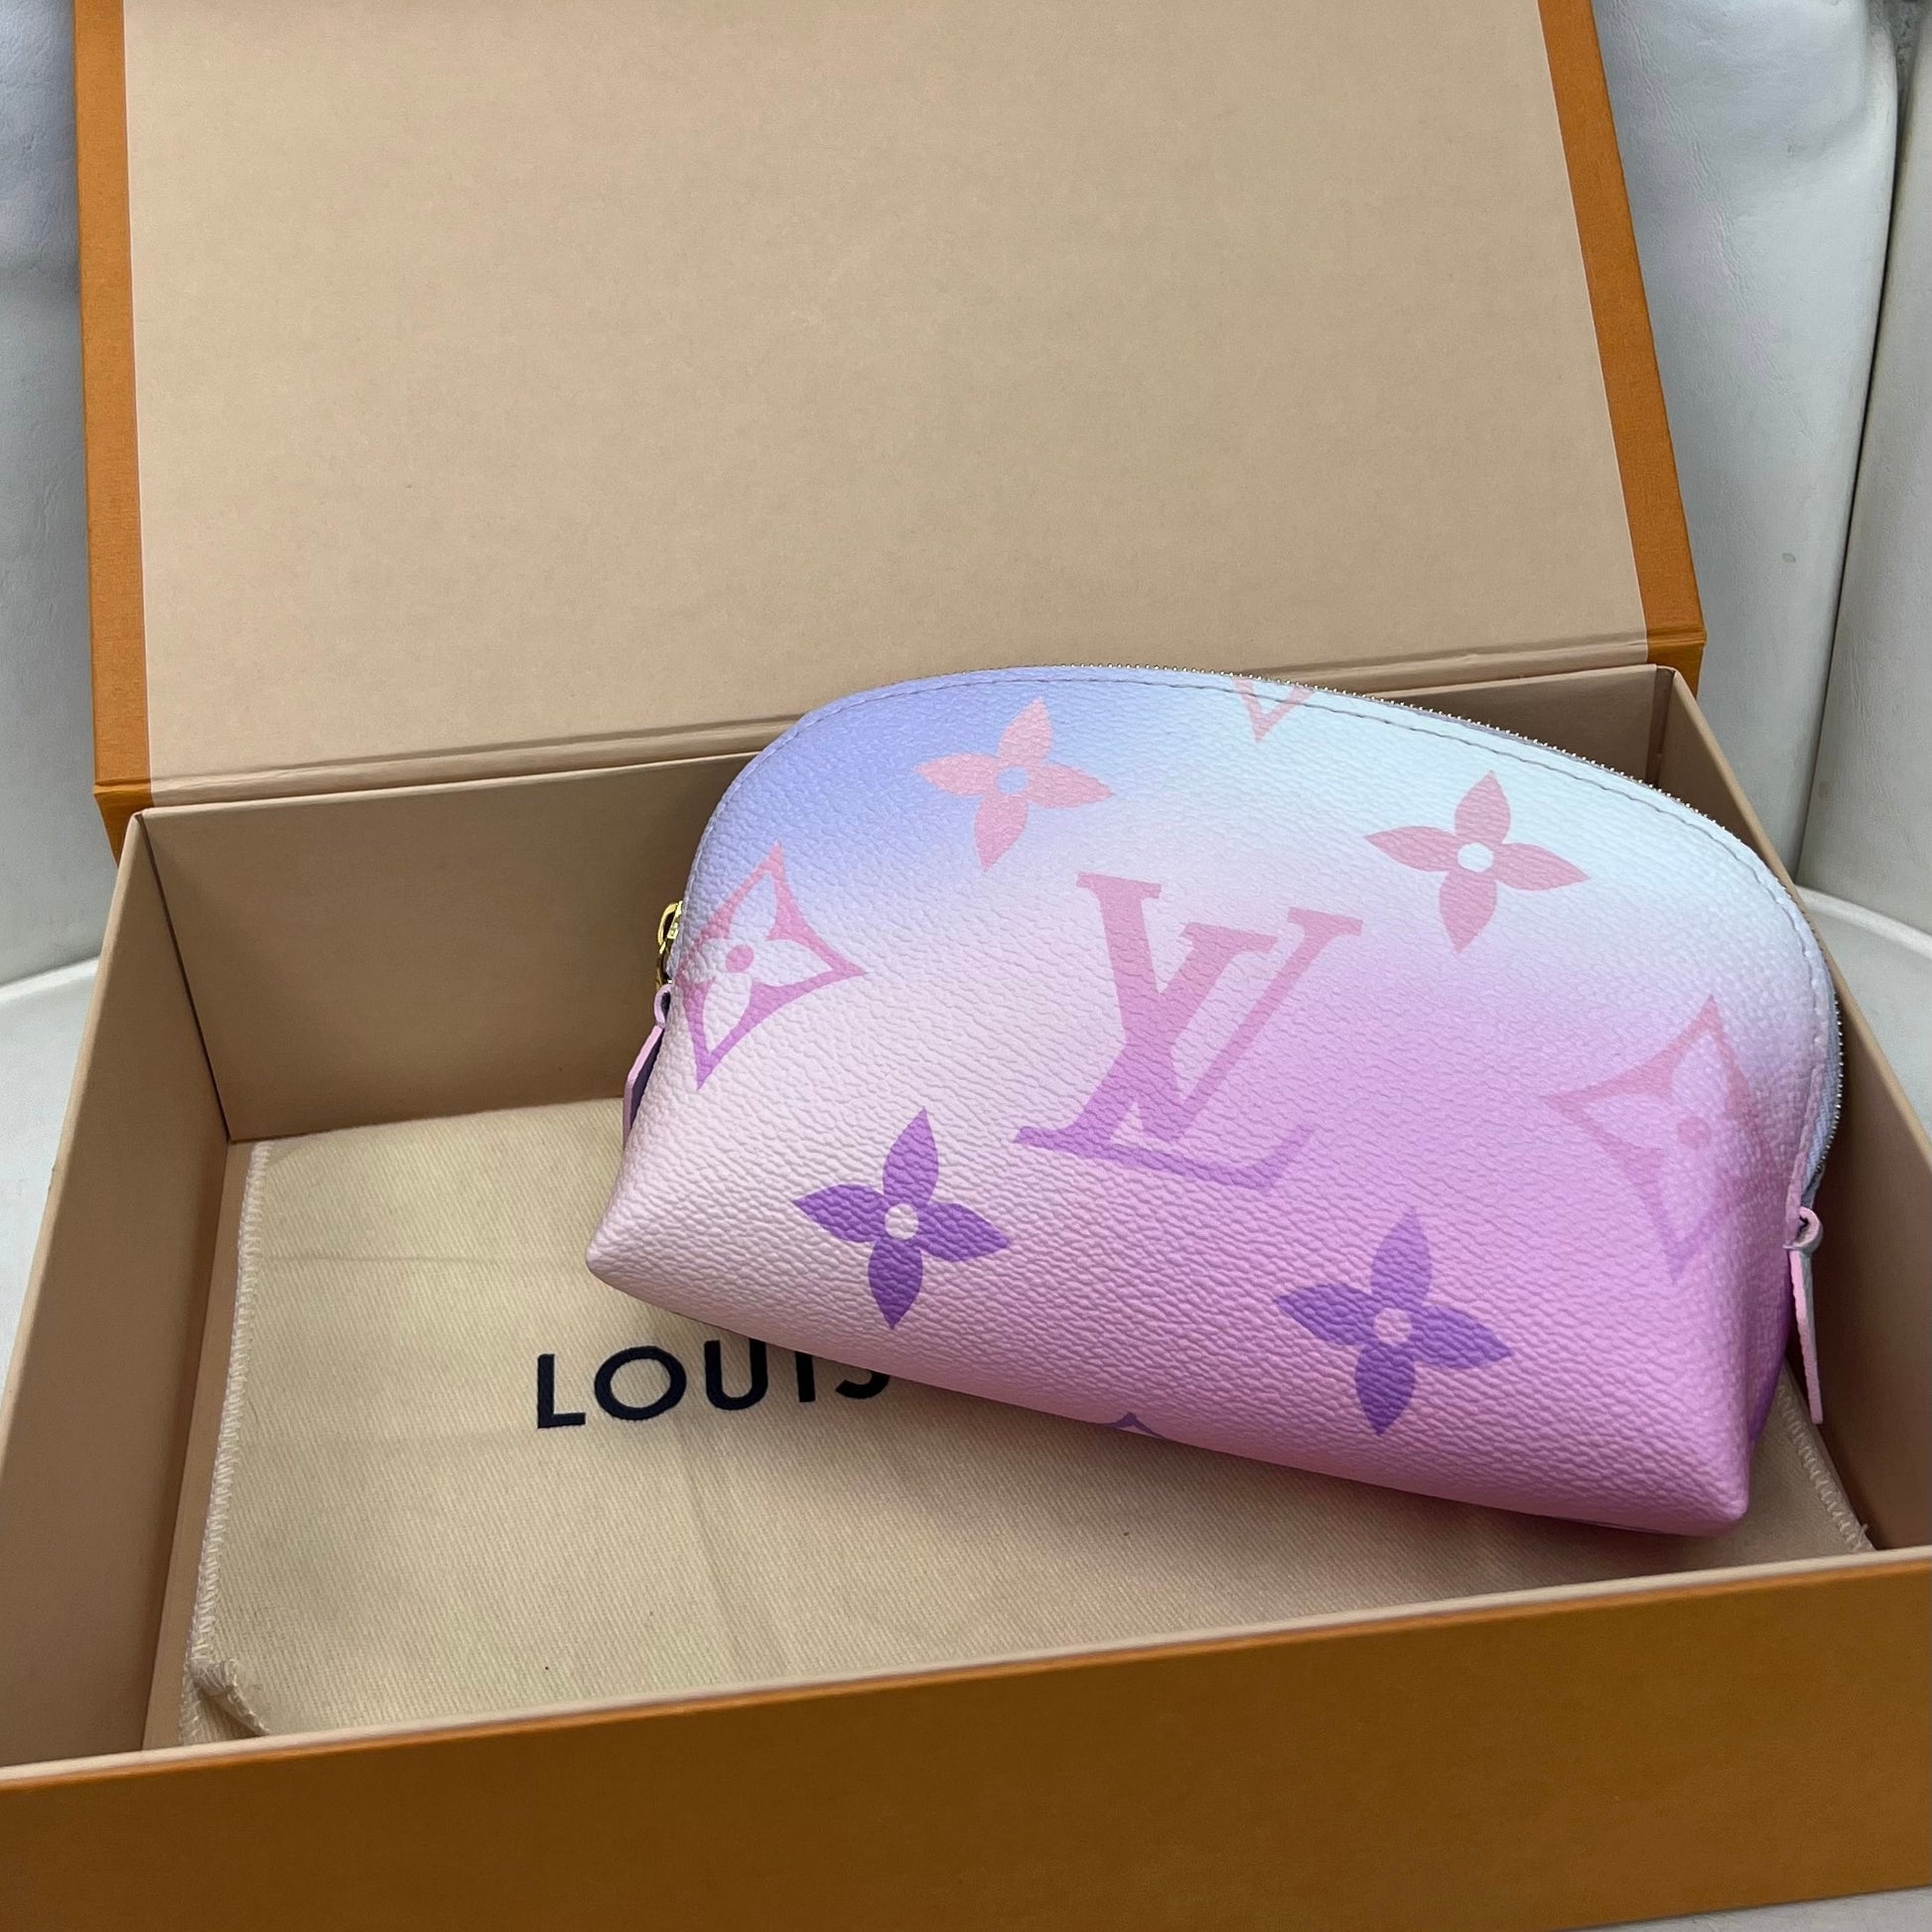 Louis Vuitton Monogram Giant Toiletry Pouch 26 - Pink Cosmetic